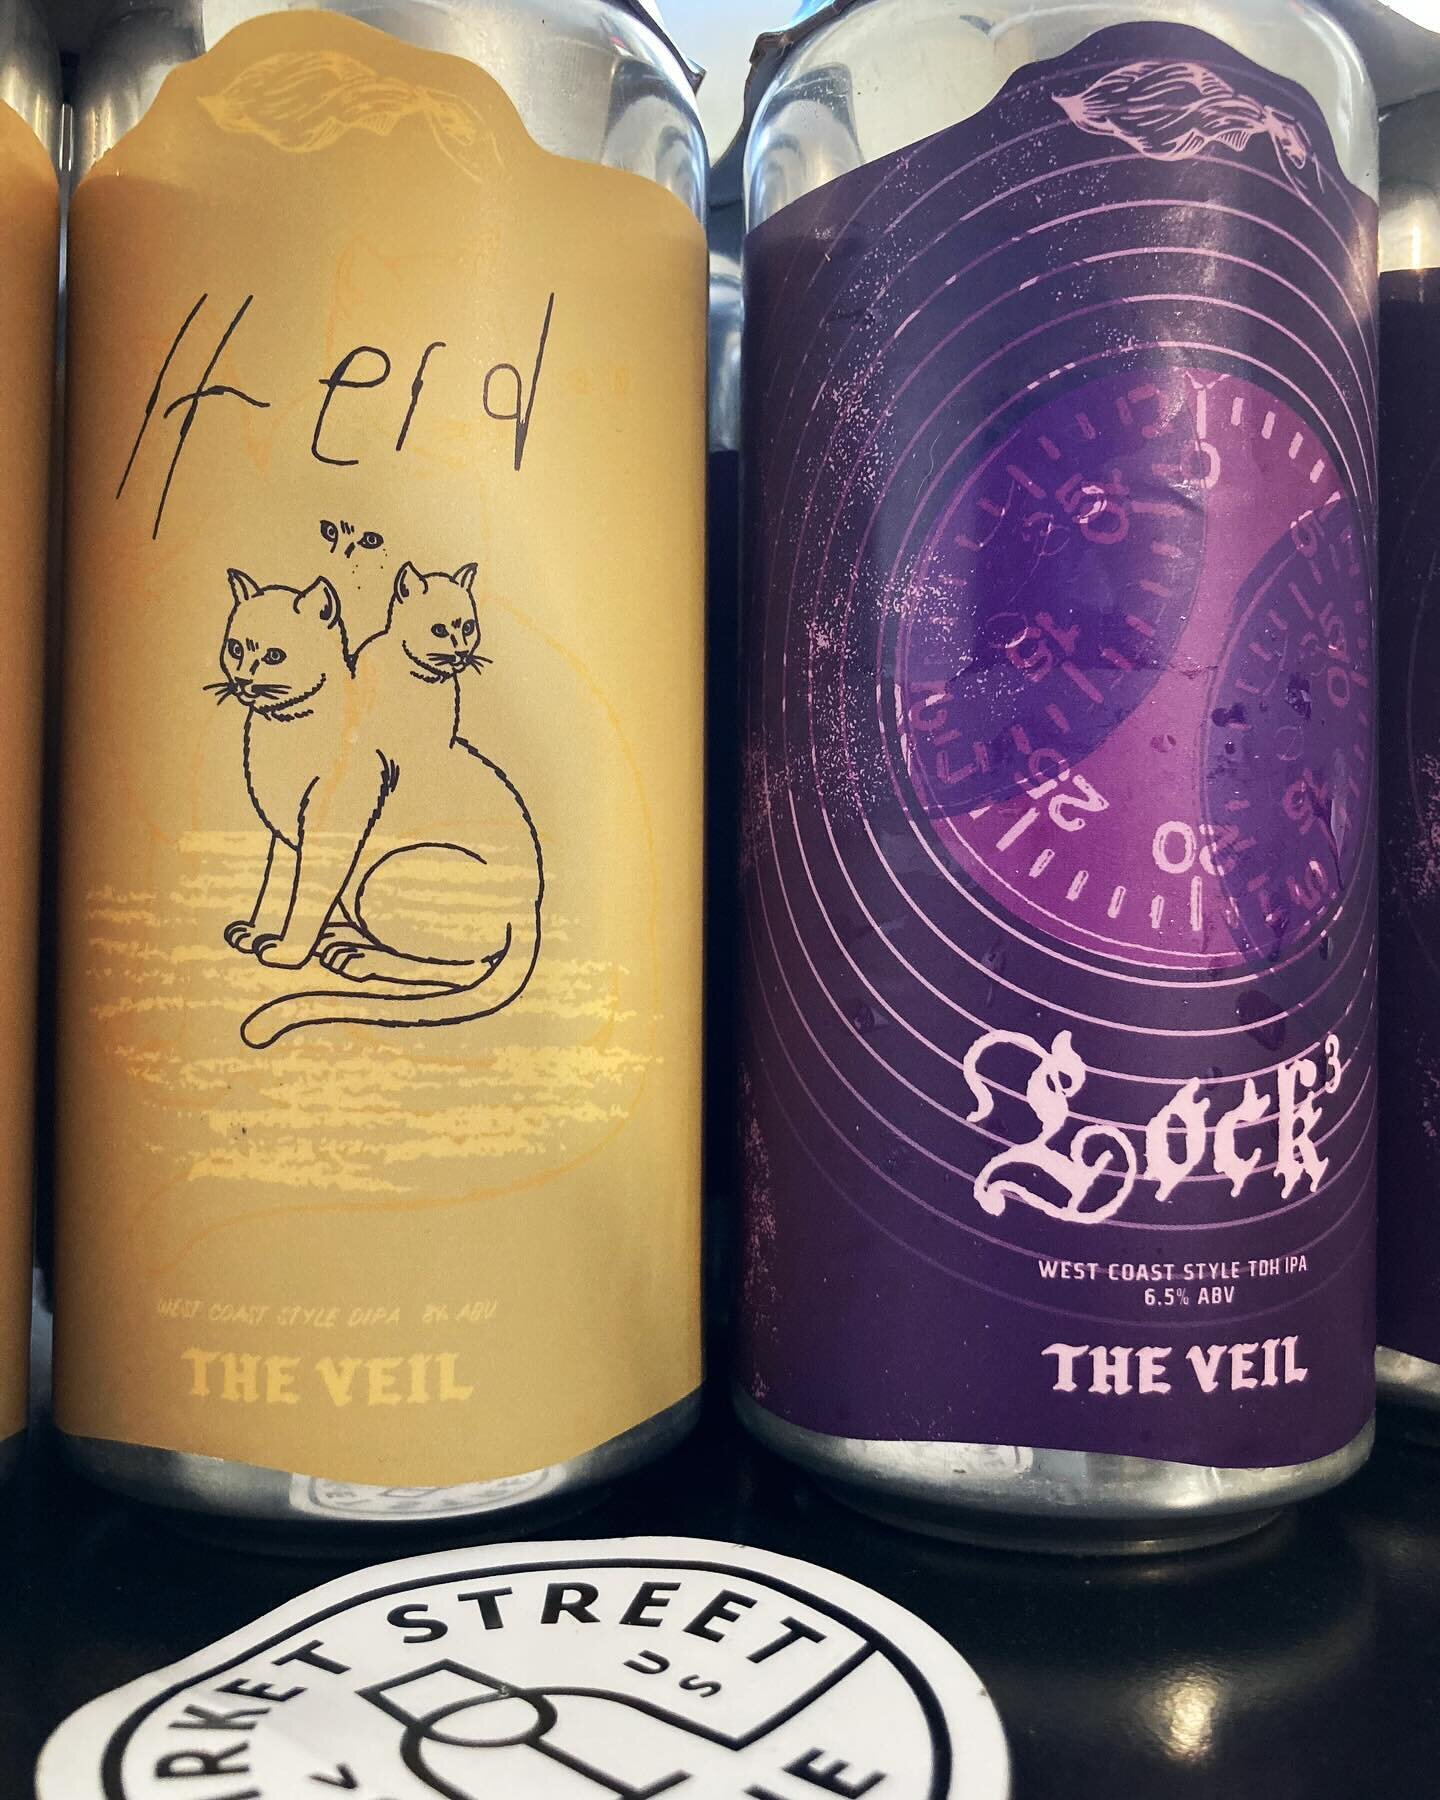 Finally, The Veil has arrived!

You have long asked for and we have long coveted the beers from @theveilbrewing . We are so excited to be one of the chosen few to carry this brewery&rsquo;s beers in Charlottesville, VA. Thank you, dear customers, for